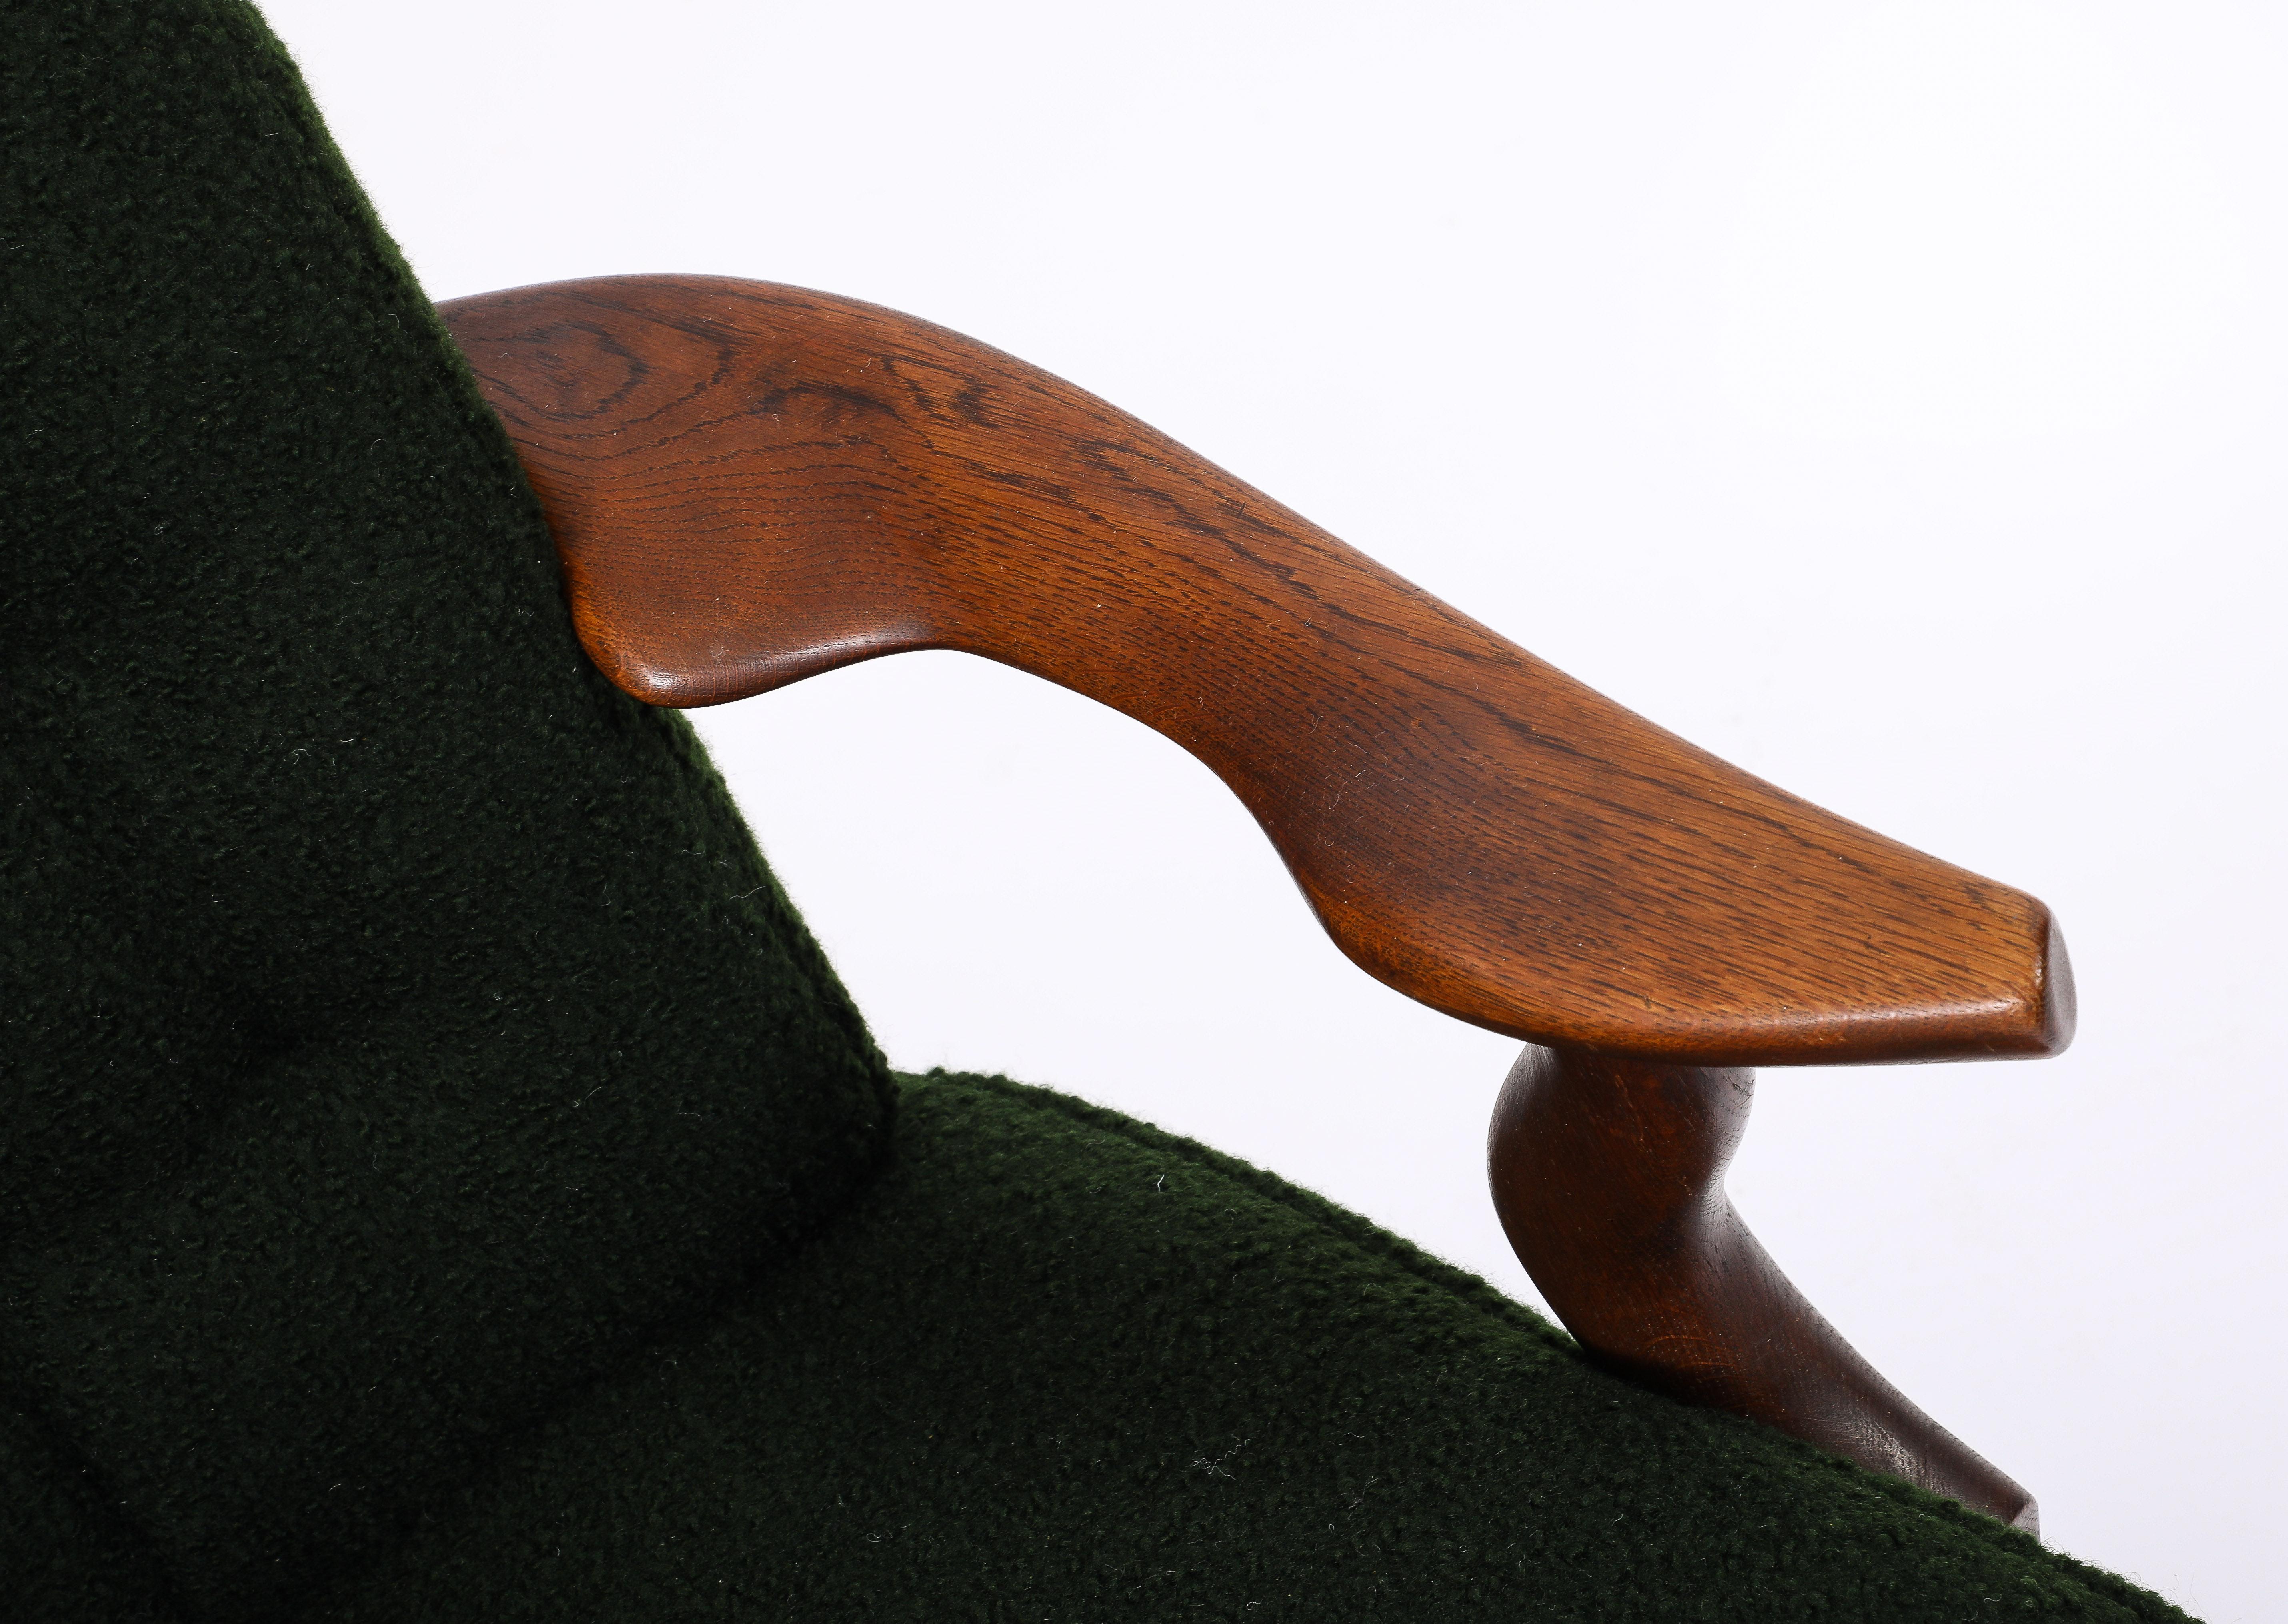 Guillerme & Chambron Petit Repos Armchair in Green Bouclé, France 1950's For Sale 3